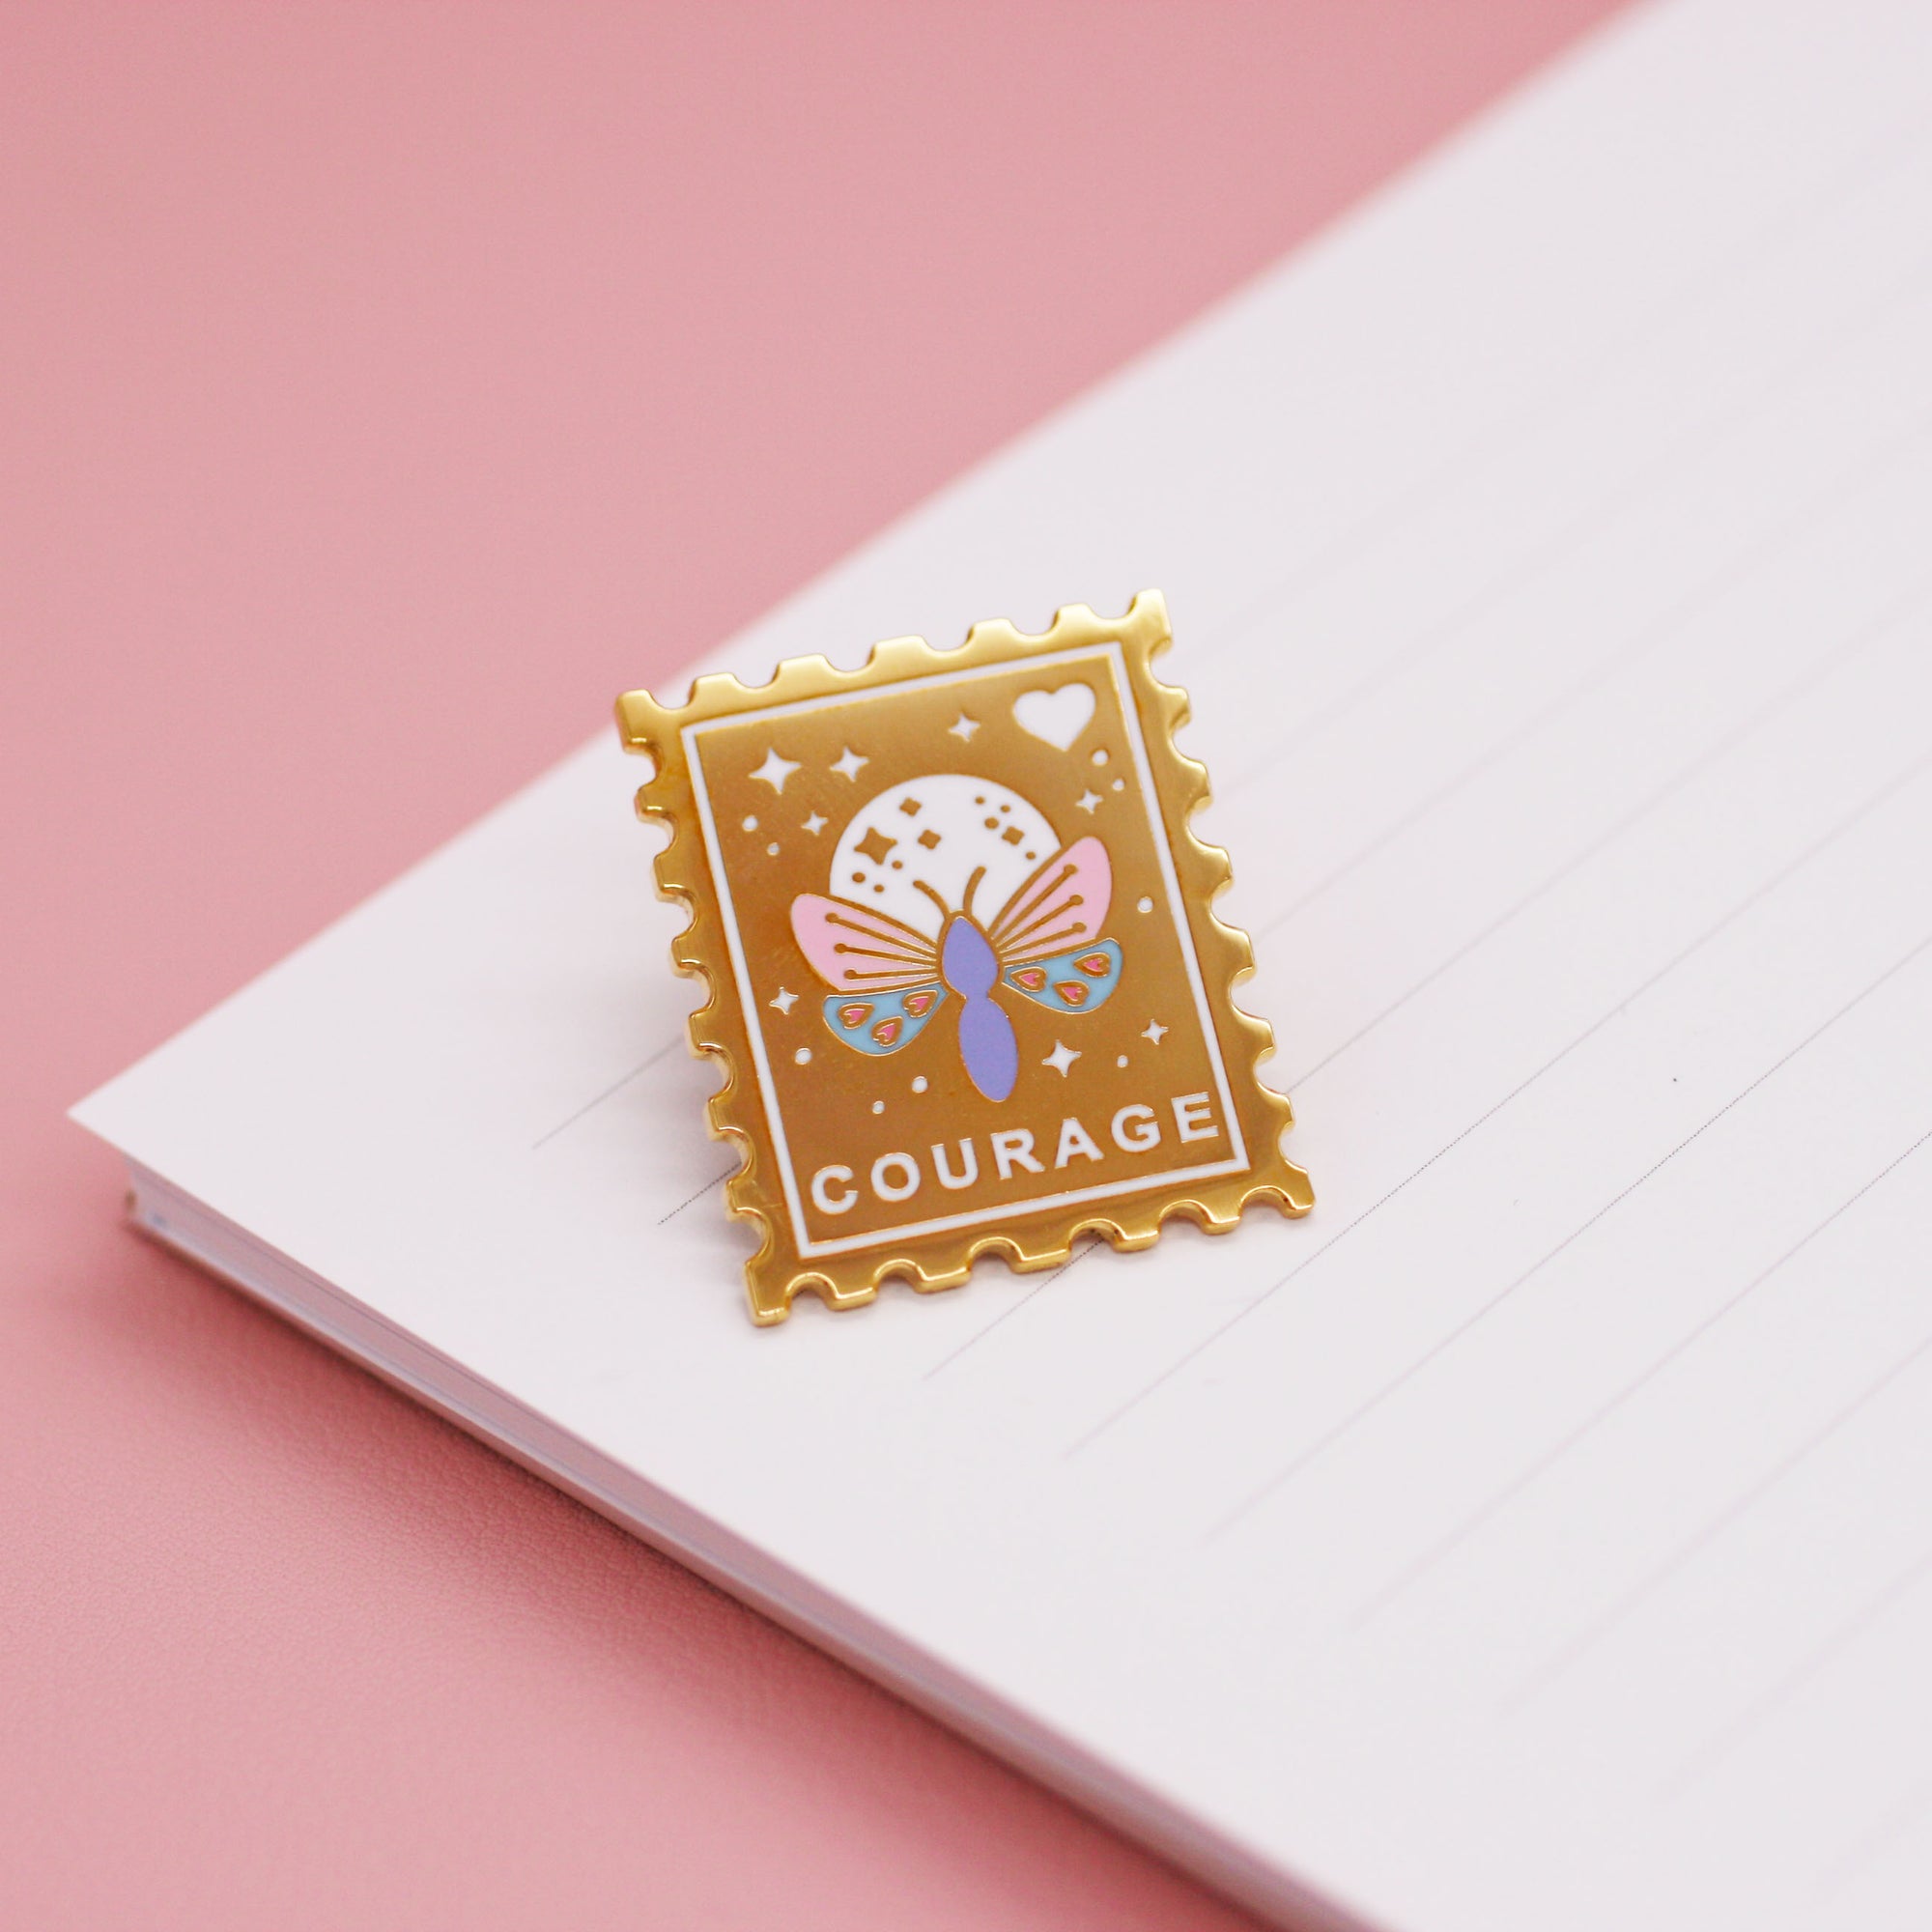 Send Yourself Courage Stamp Enamel Pin